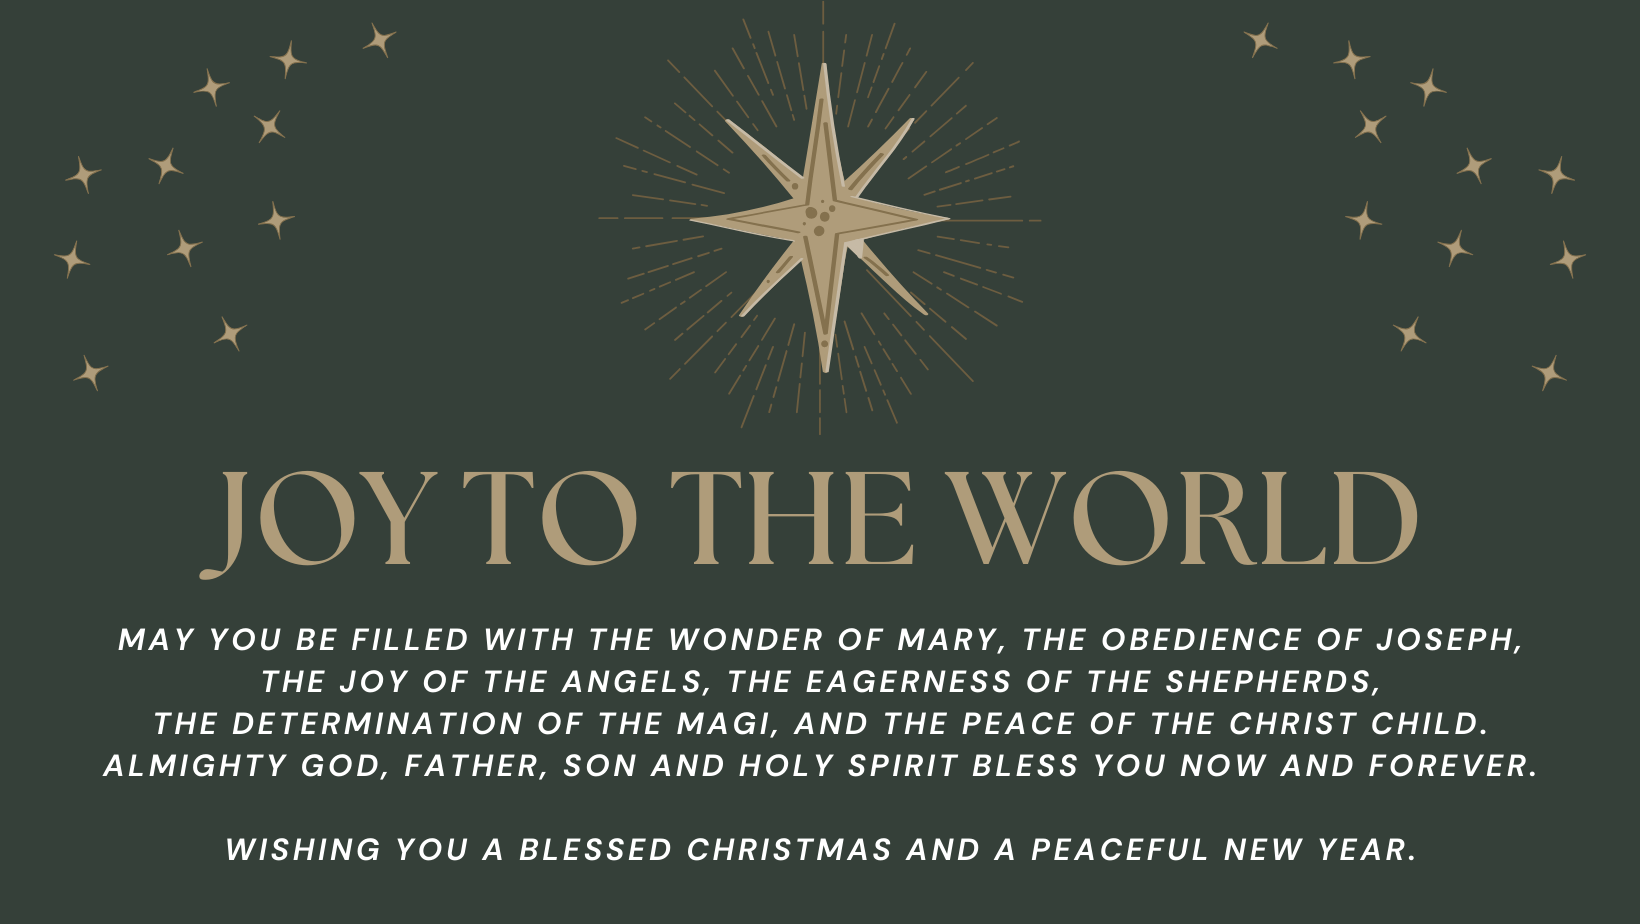 Joy to the World May you be filled with the wonder of Mary, the obedience of Joseph, the joy of the angels, the eagerness of the shepherds, the determination of the magi, and the peace of the Christ child. Almighty God, Father, Son and Holy Spirit bless you now and forever. Wishing you a blessed Christmas and a peaceful New Year.